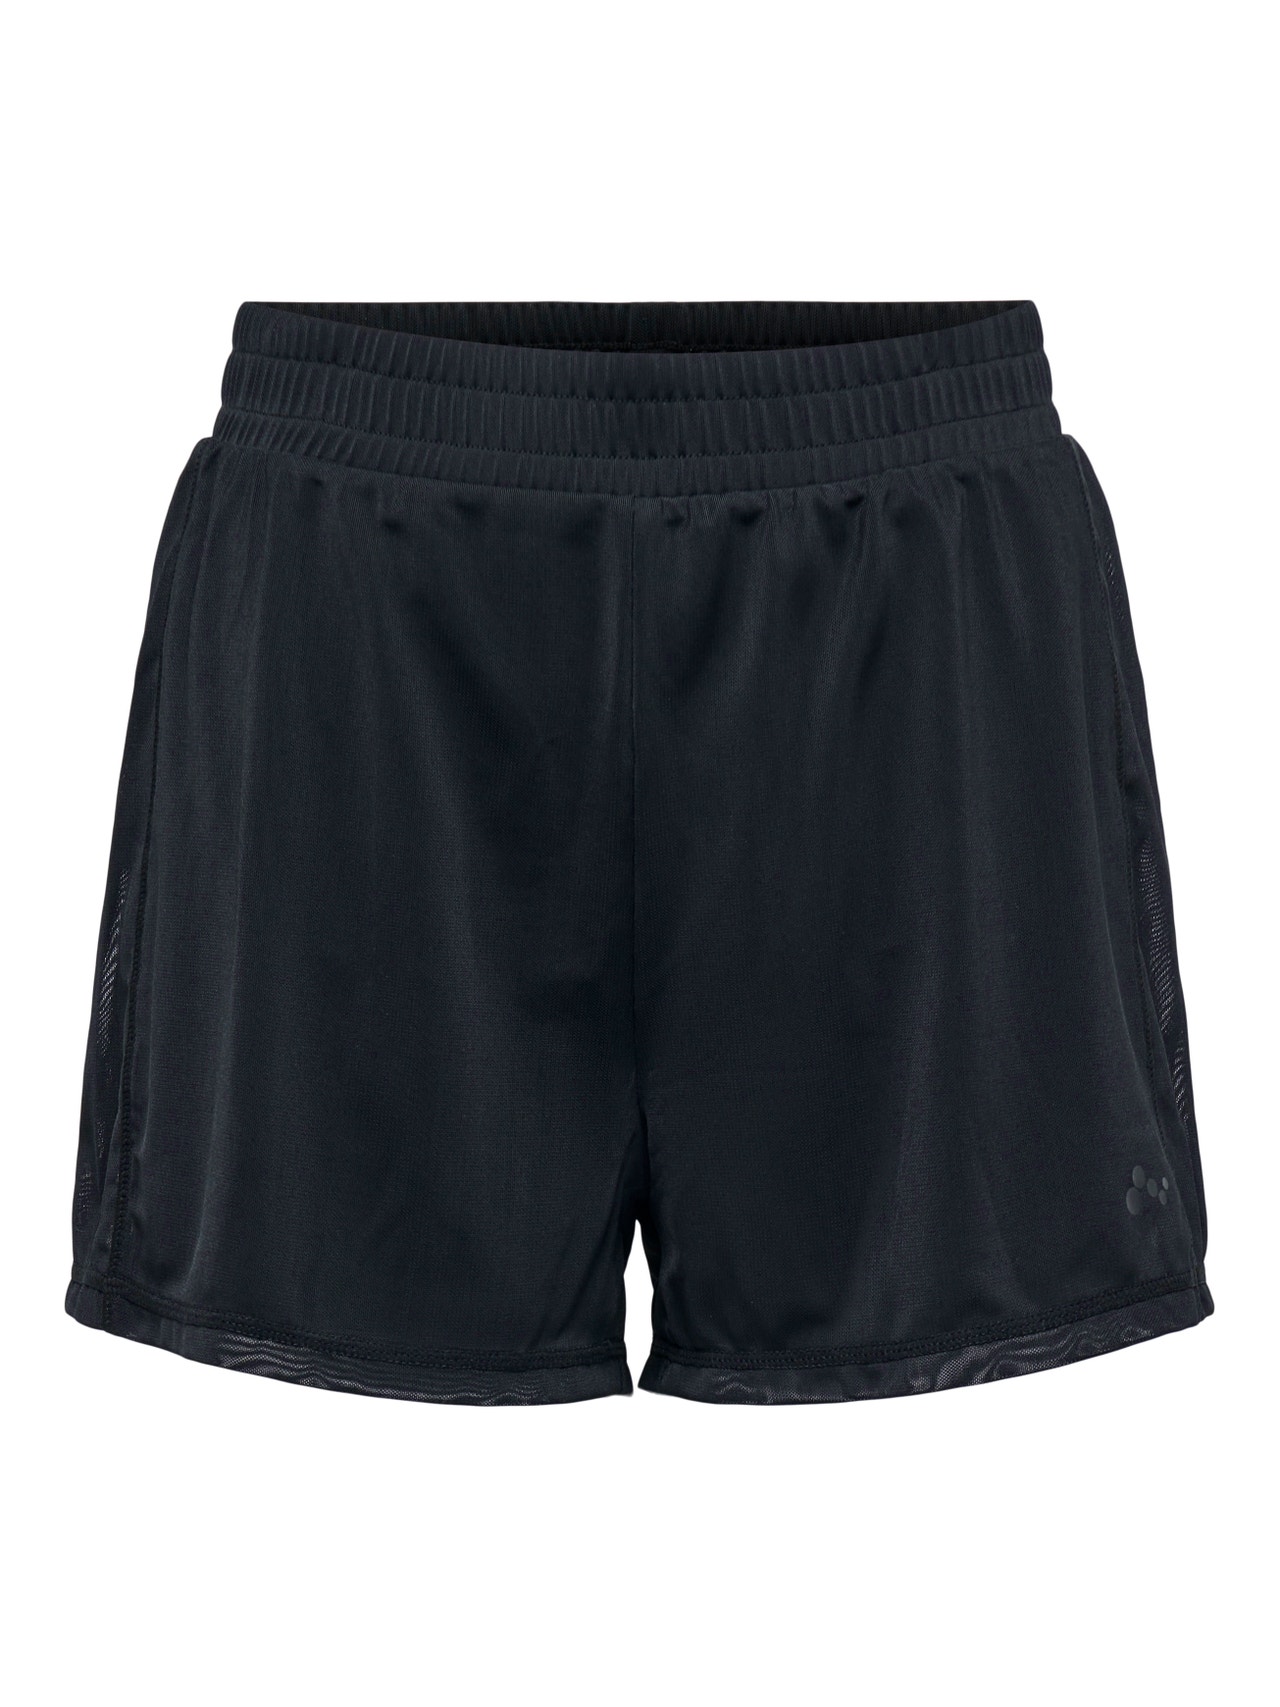 ONLY Loose fit Mid waist Shorts -Black - 15287622